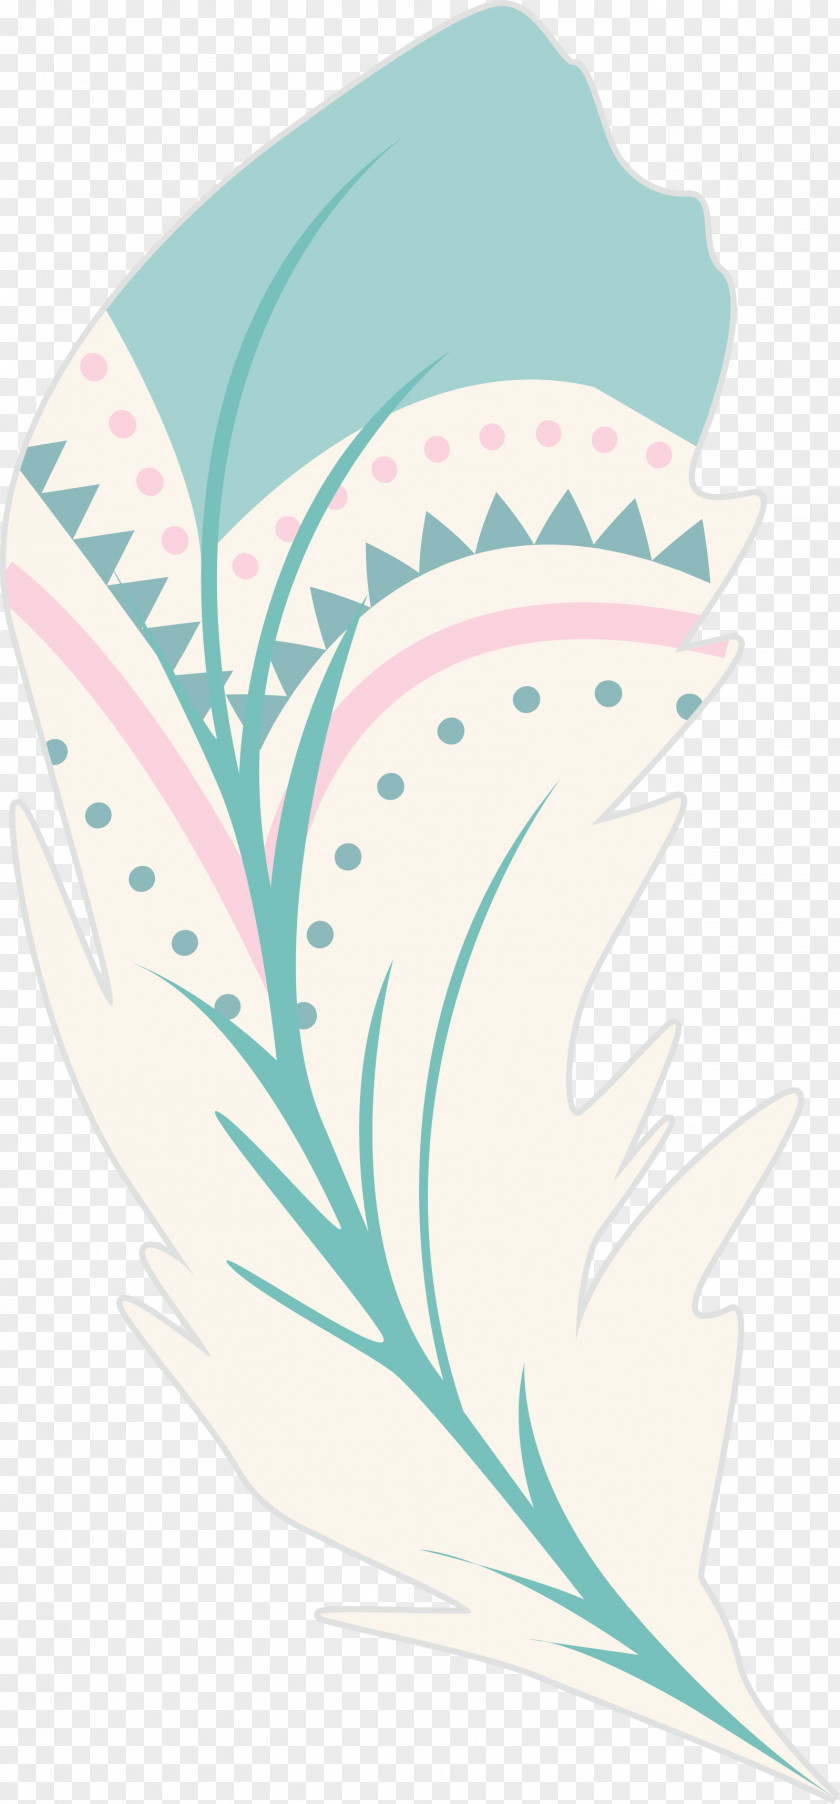 Blue Feather Illustration PNG